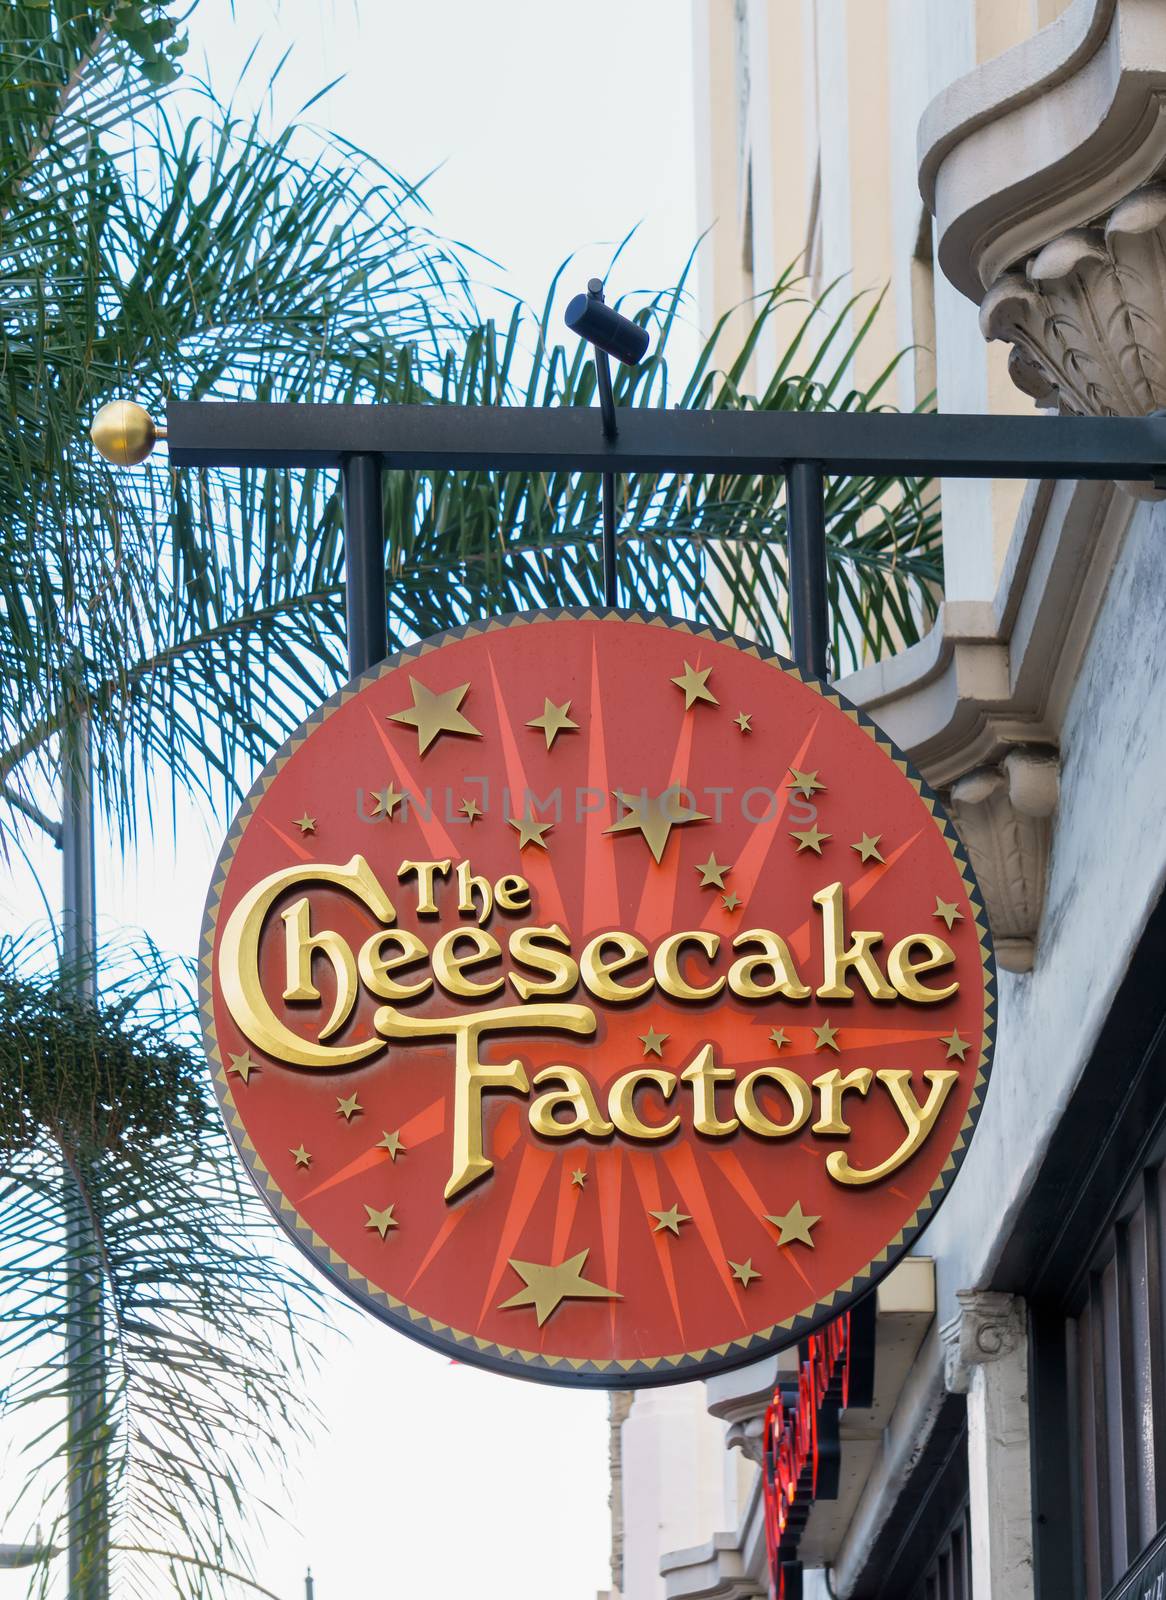 PASADENA, CA/USA - OCTOBER 4, 2015: Cheesecake Factory restauruant sign. The Cheesecake Factory, Inc. is a distributor of cheesecakes and restaurant company.